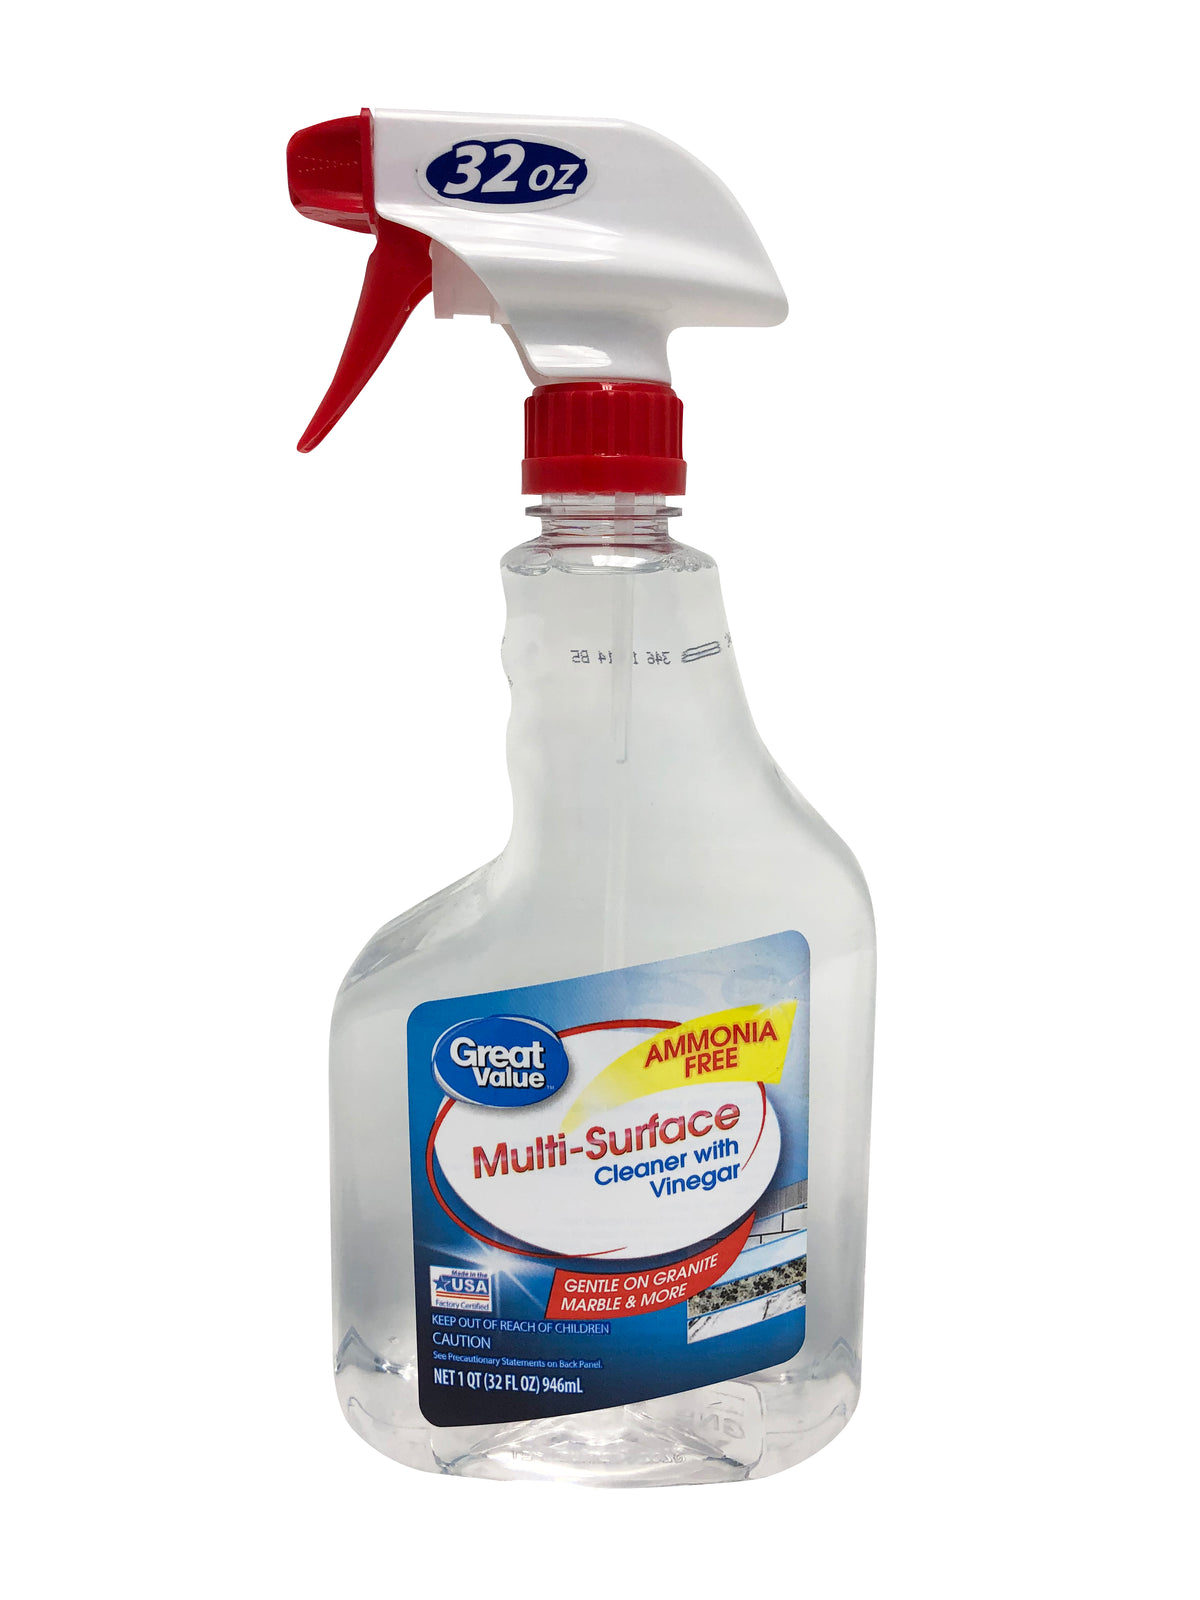 https://www.rafaelosusa.shop/wp-content/uploads/1692/13/shop-for-great-value-ammonia-free-multi-surface-cleaner-with-vinegar-1-qt-32-oz-great-value-at-us_0.jpg